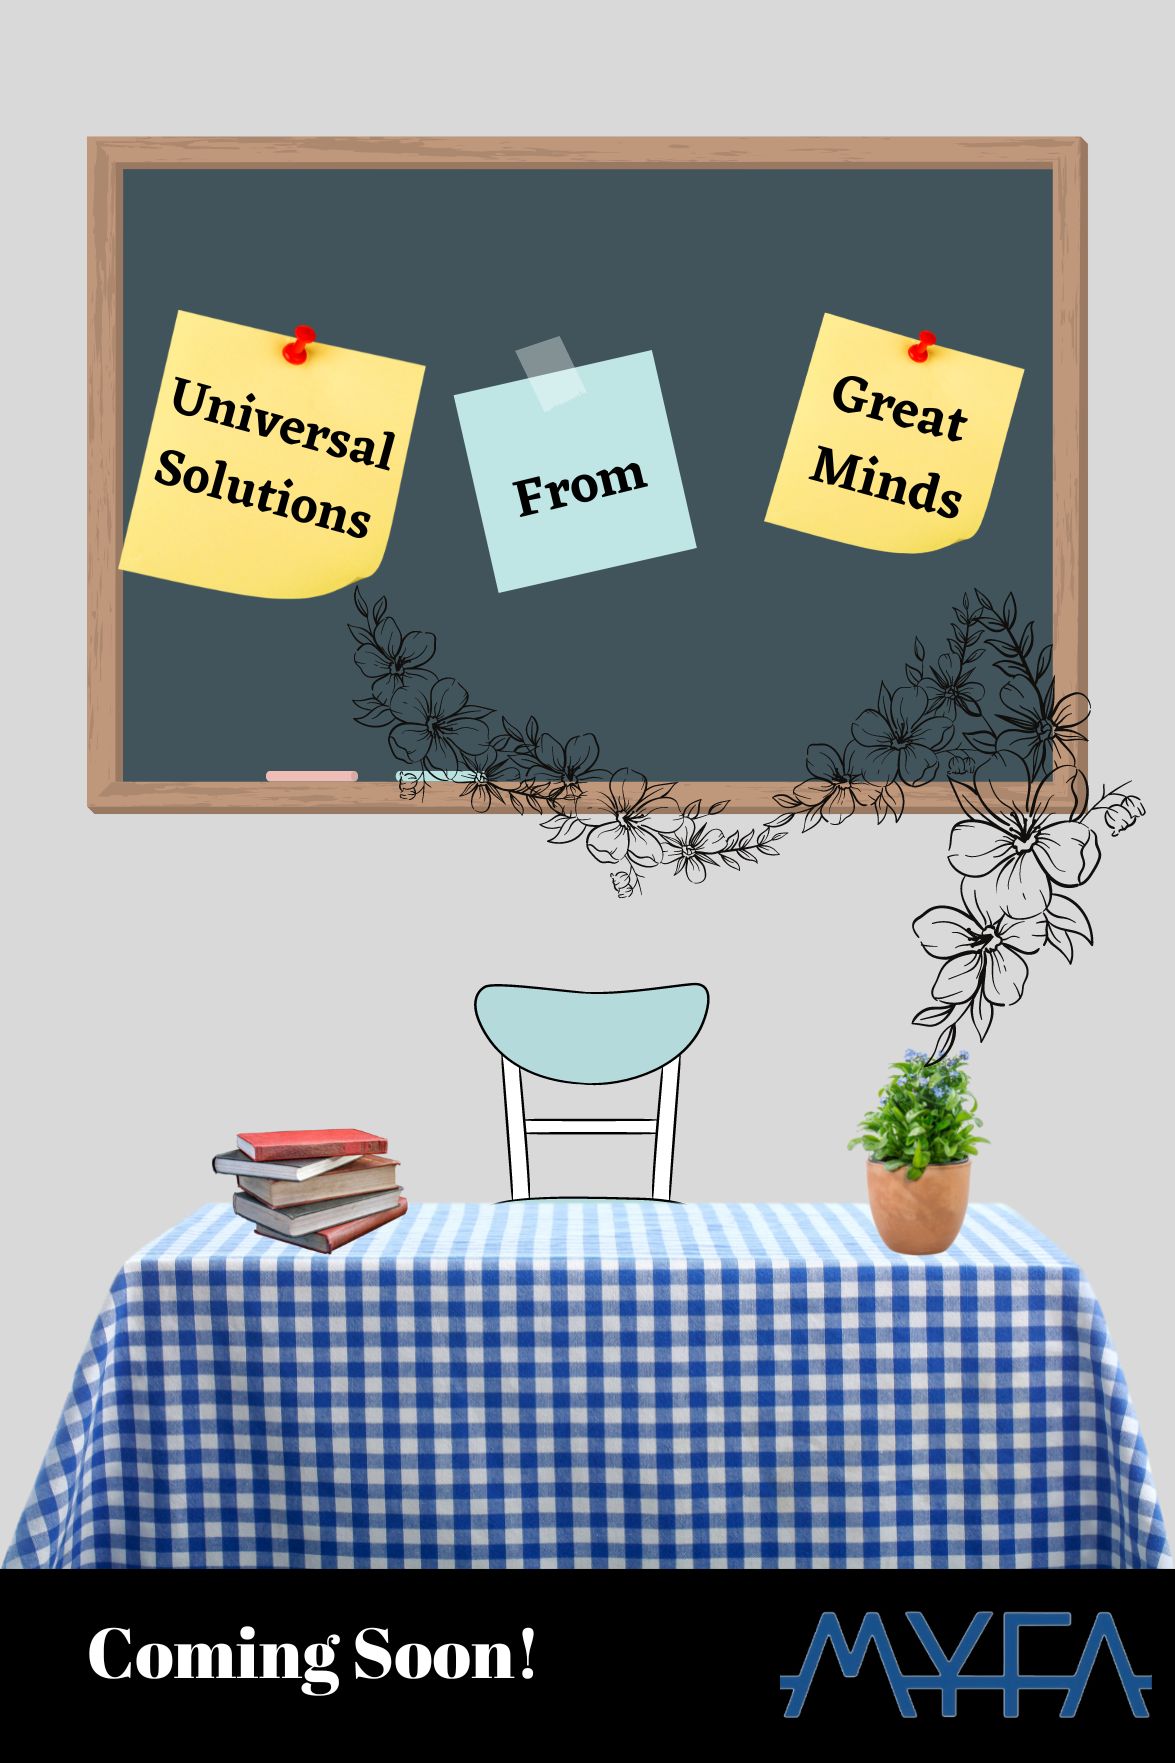 Universal Solutions from Great Minds